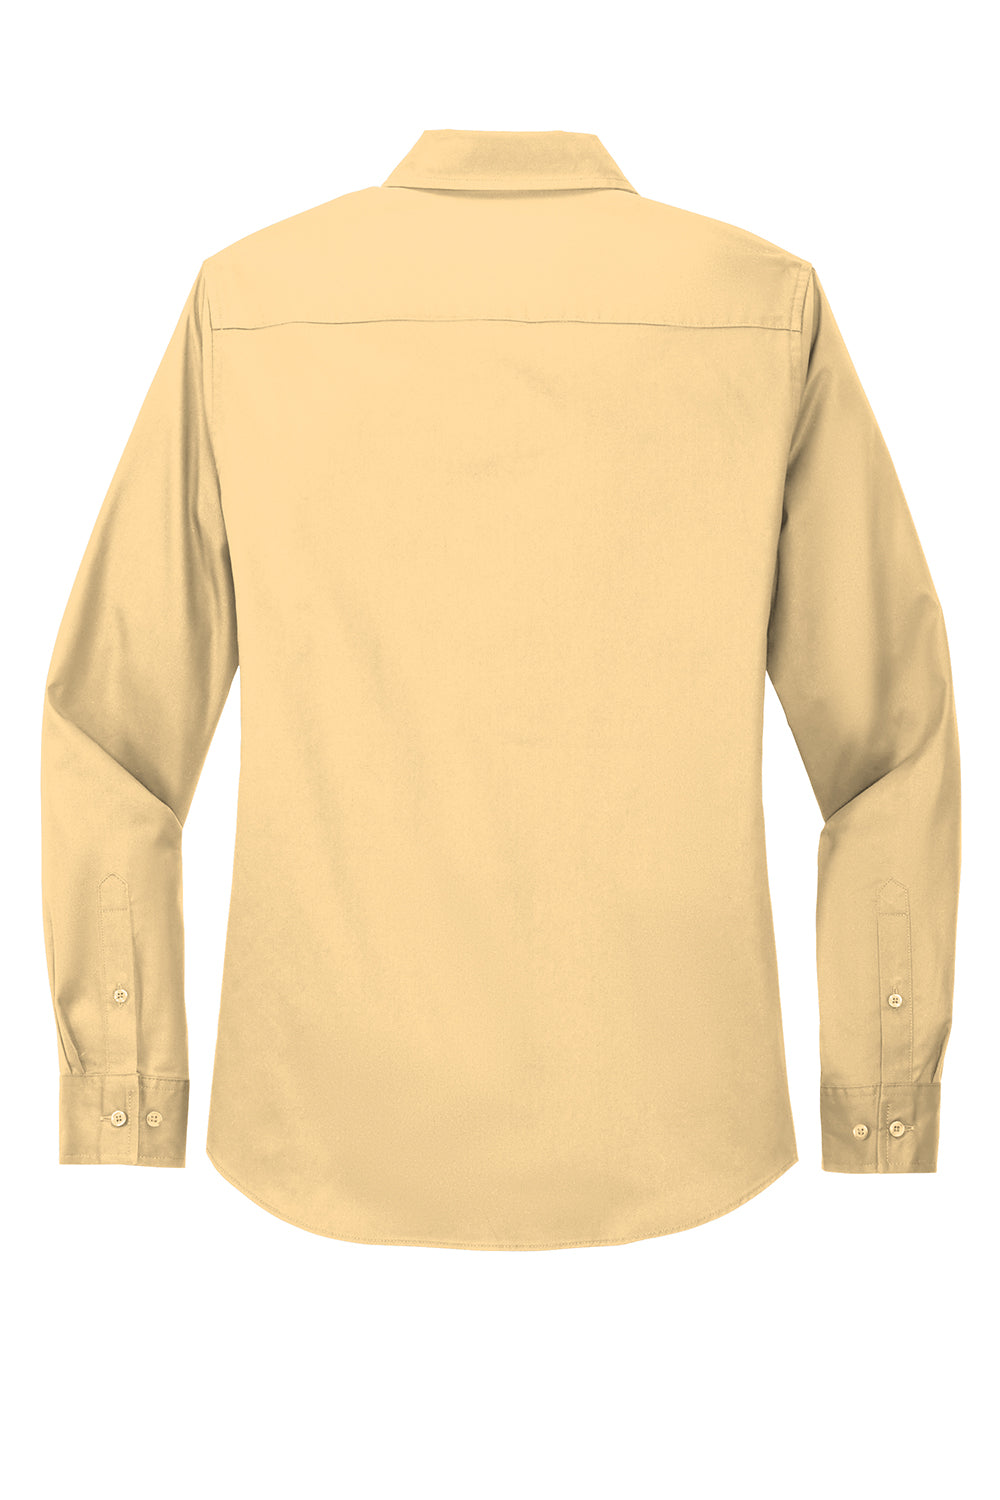 Port Authority L608 Womens Easy Care Wrinkle Resistant Long Sleeve Button Down Shirt Yellow Flat Back